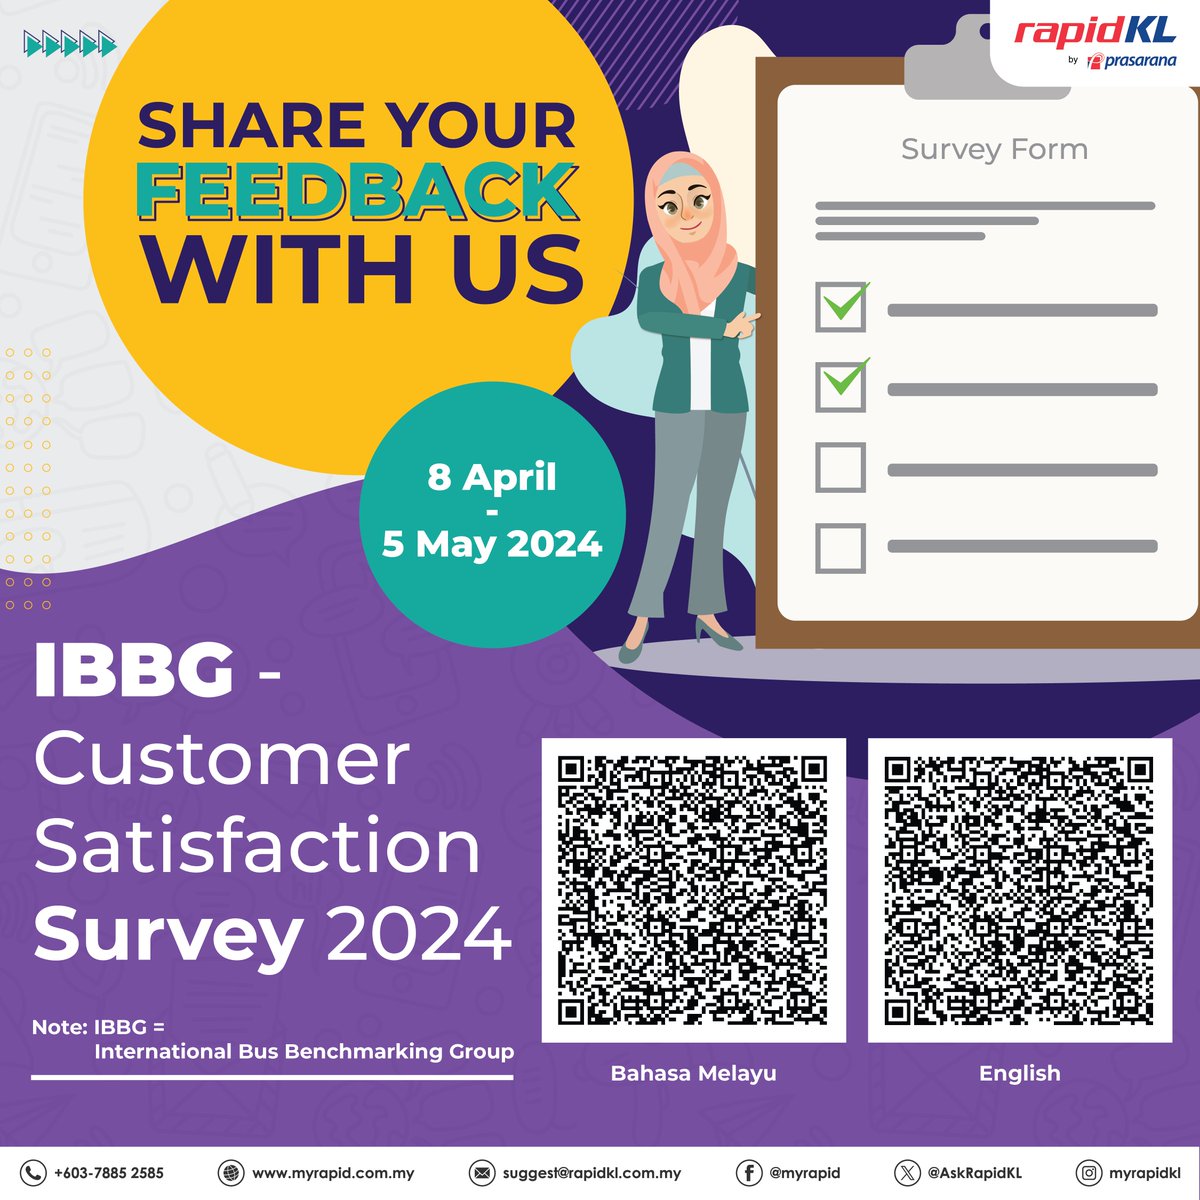 Your feedback matters to us! Take a few minutes to share your thoughts and help us improve our services. Share your feedback with us! Participate in our survey by clicking the link: bit.ly/4aM65b2